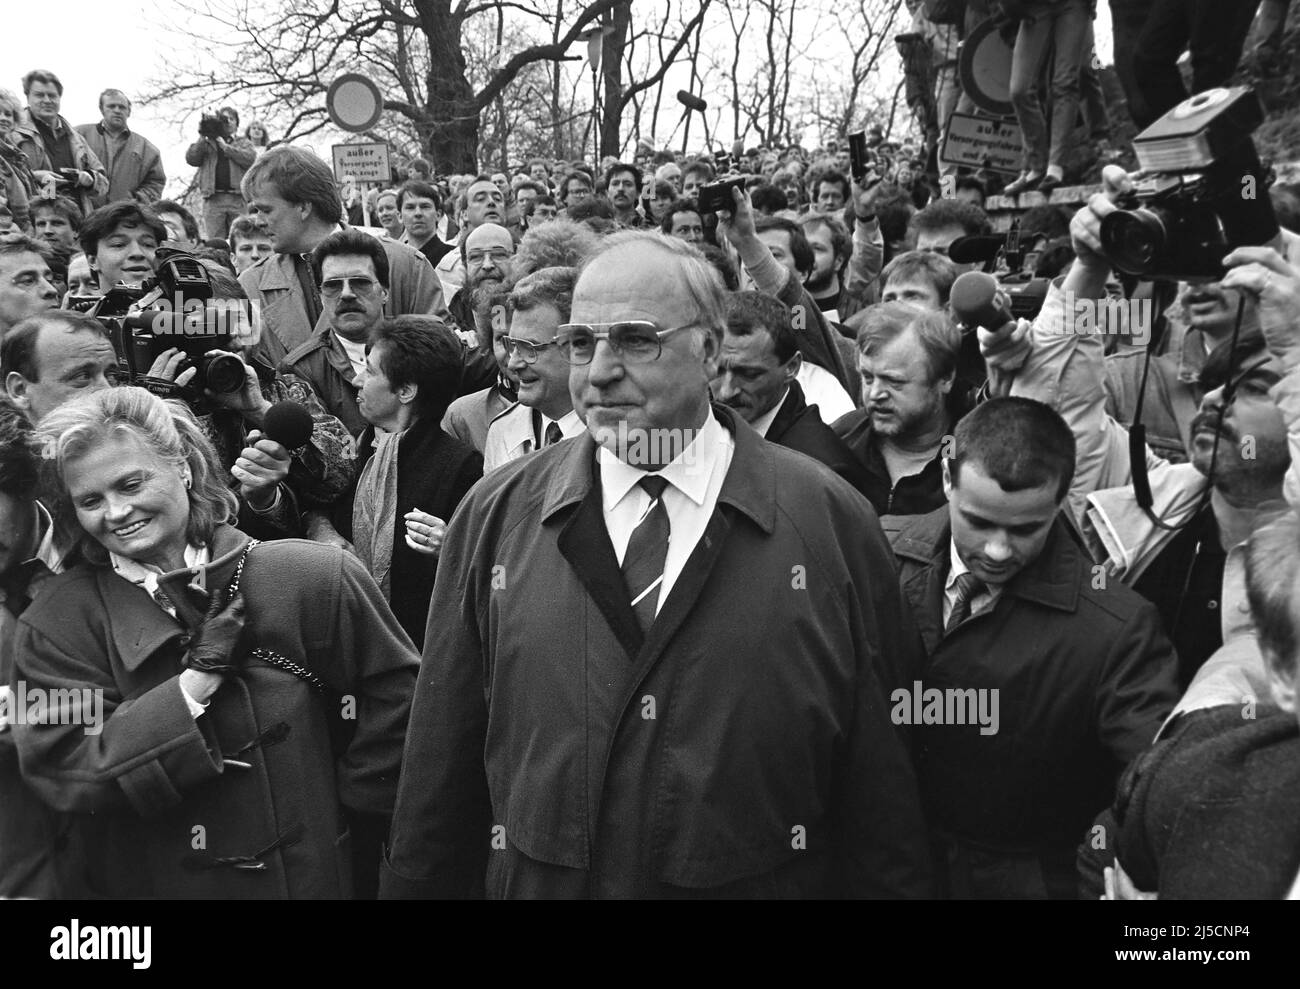 Erfurt, DEU, 08.04.1991 - Chancellor Helmut Kohl and his wife Hannelore bathing in the crowd in Erfurt. [automated translation] Stock Photo